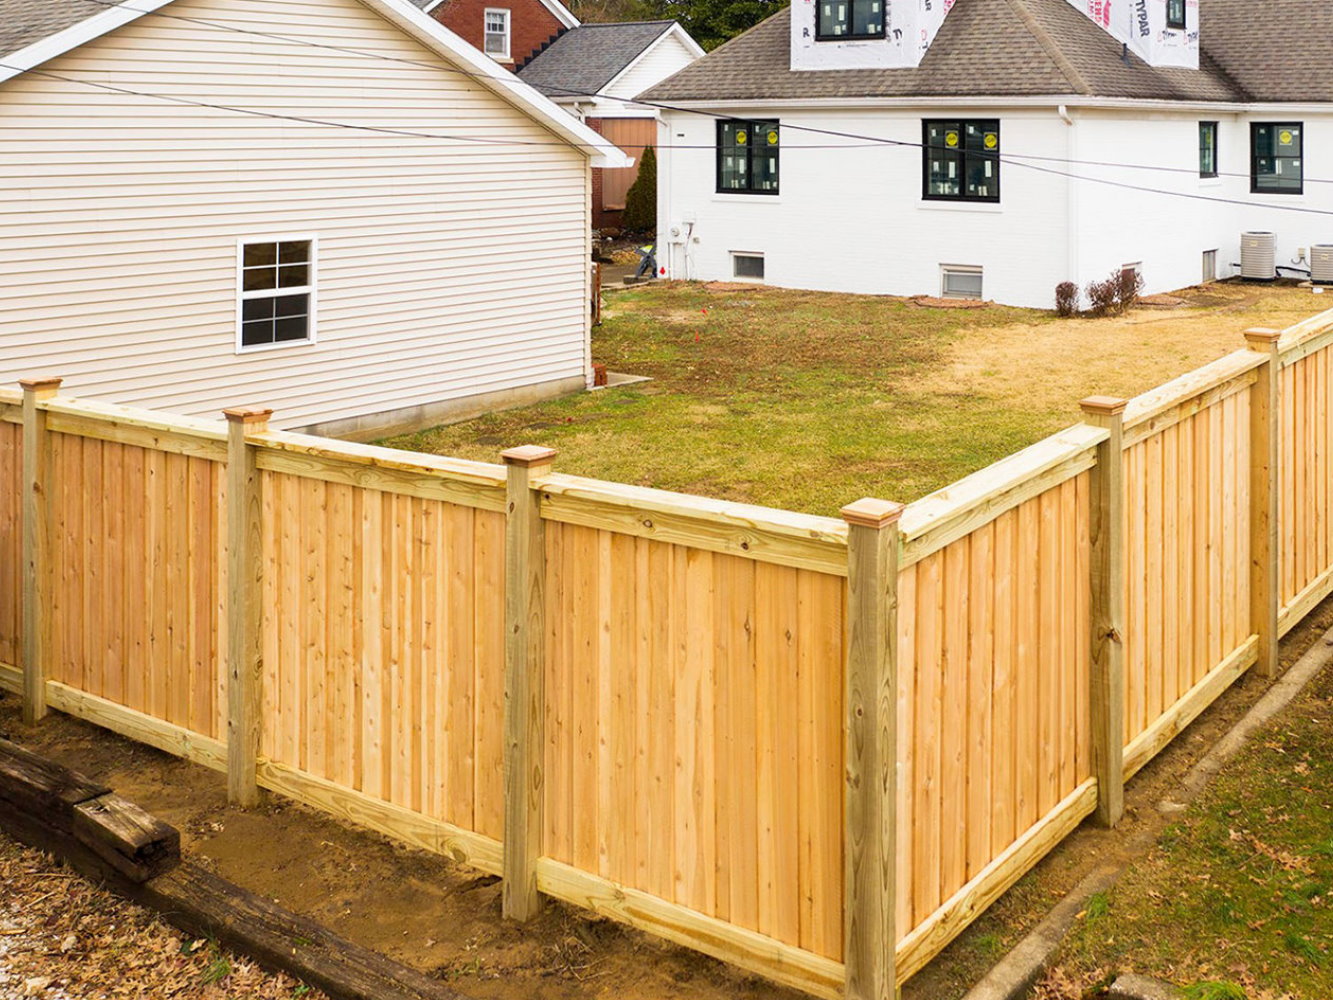 Owensboro KY cap and trim style wood fence